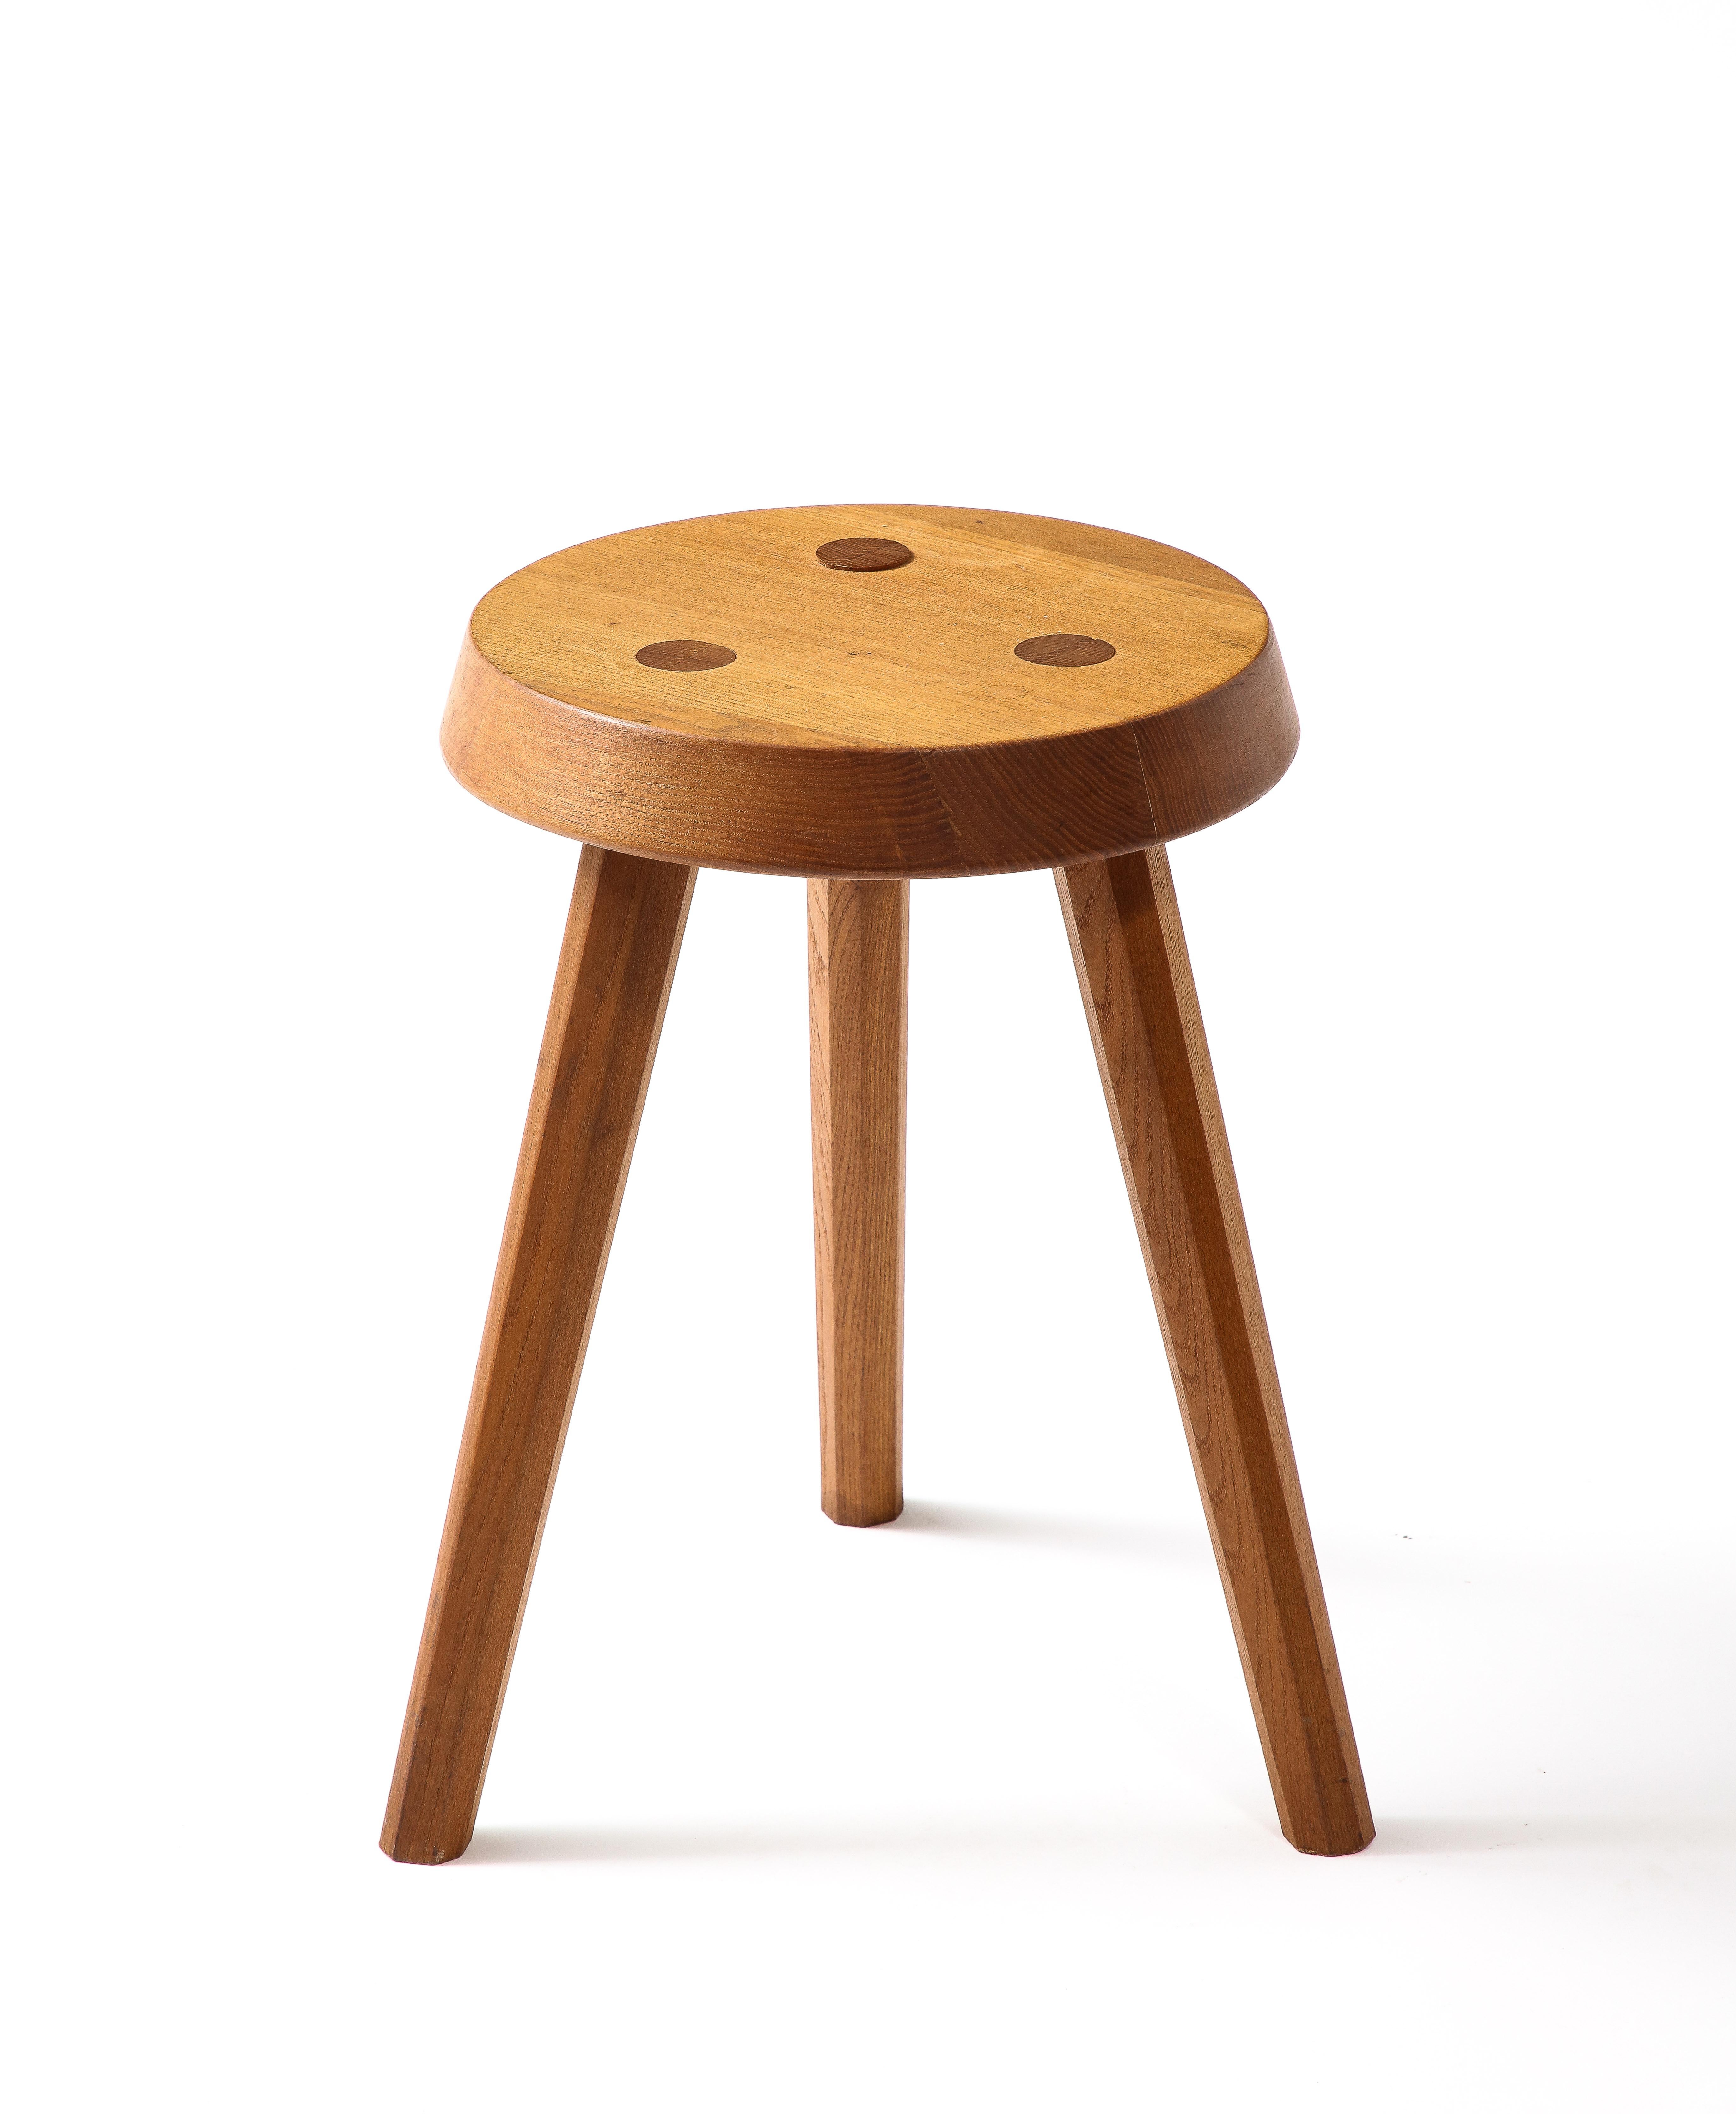 Tripod stool in the Manner of Perriand, France 1950s For Sale 1